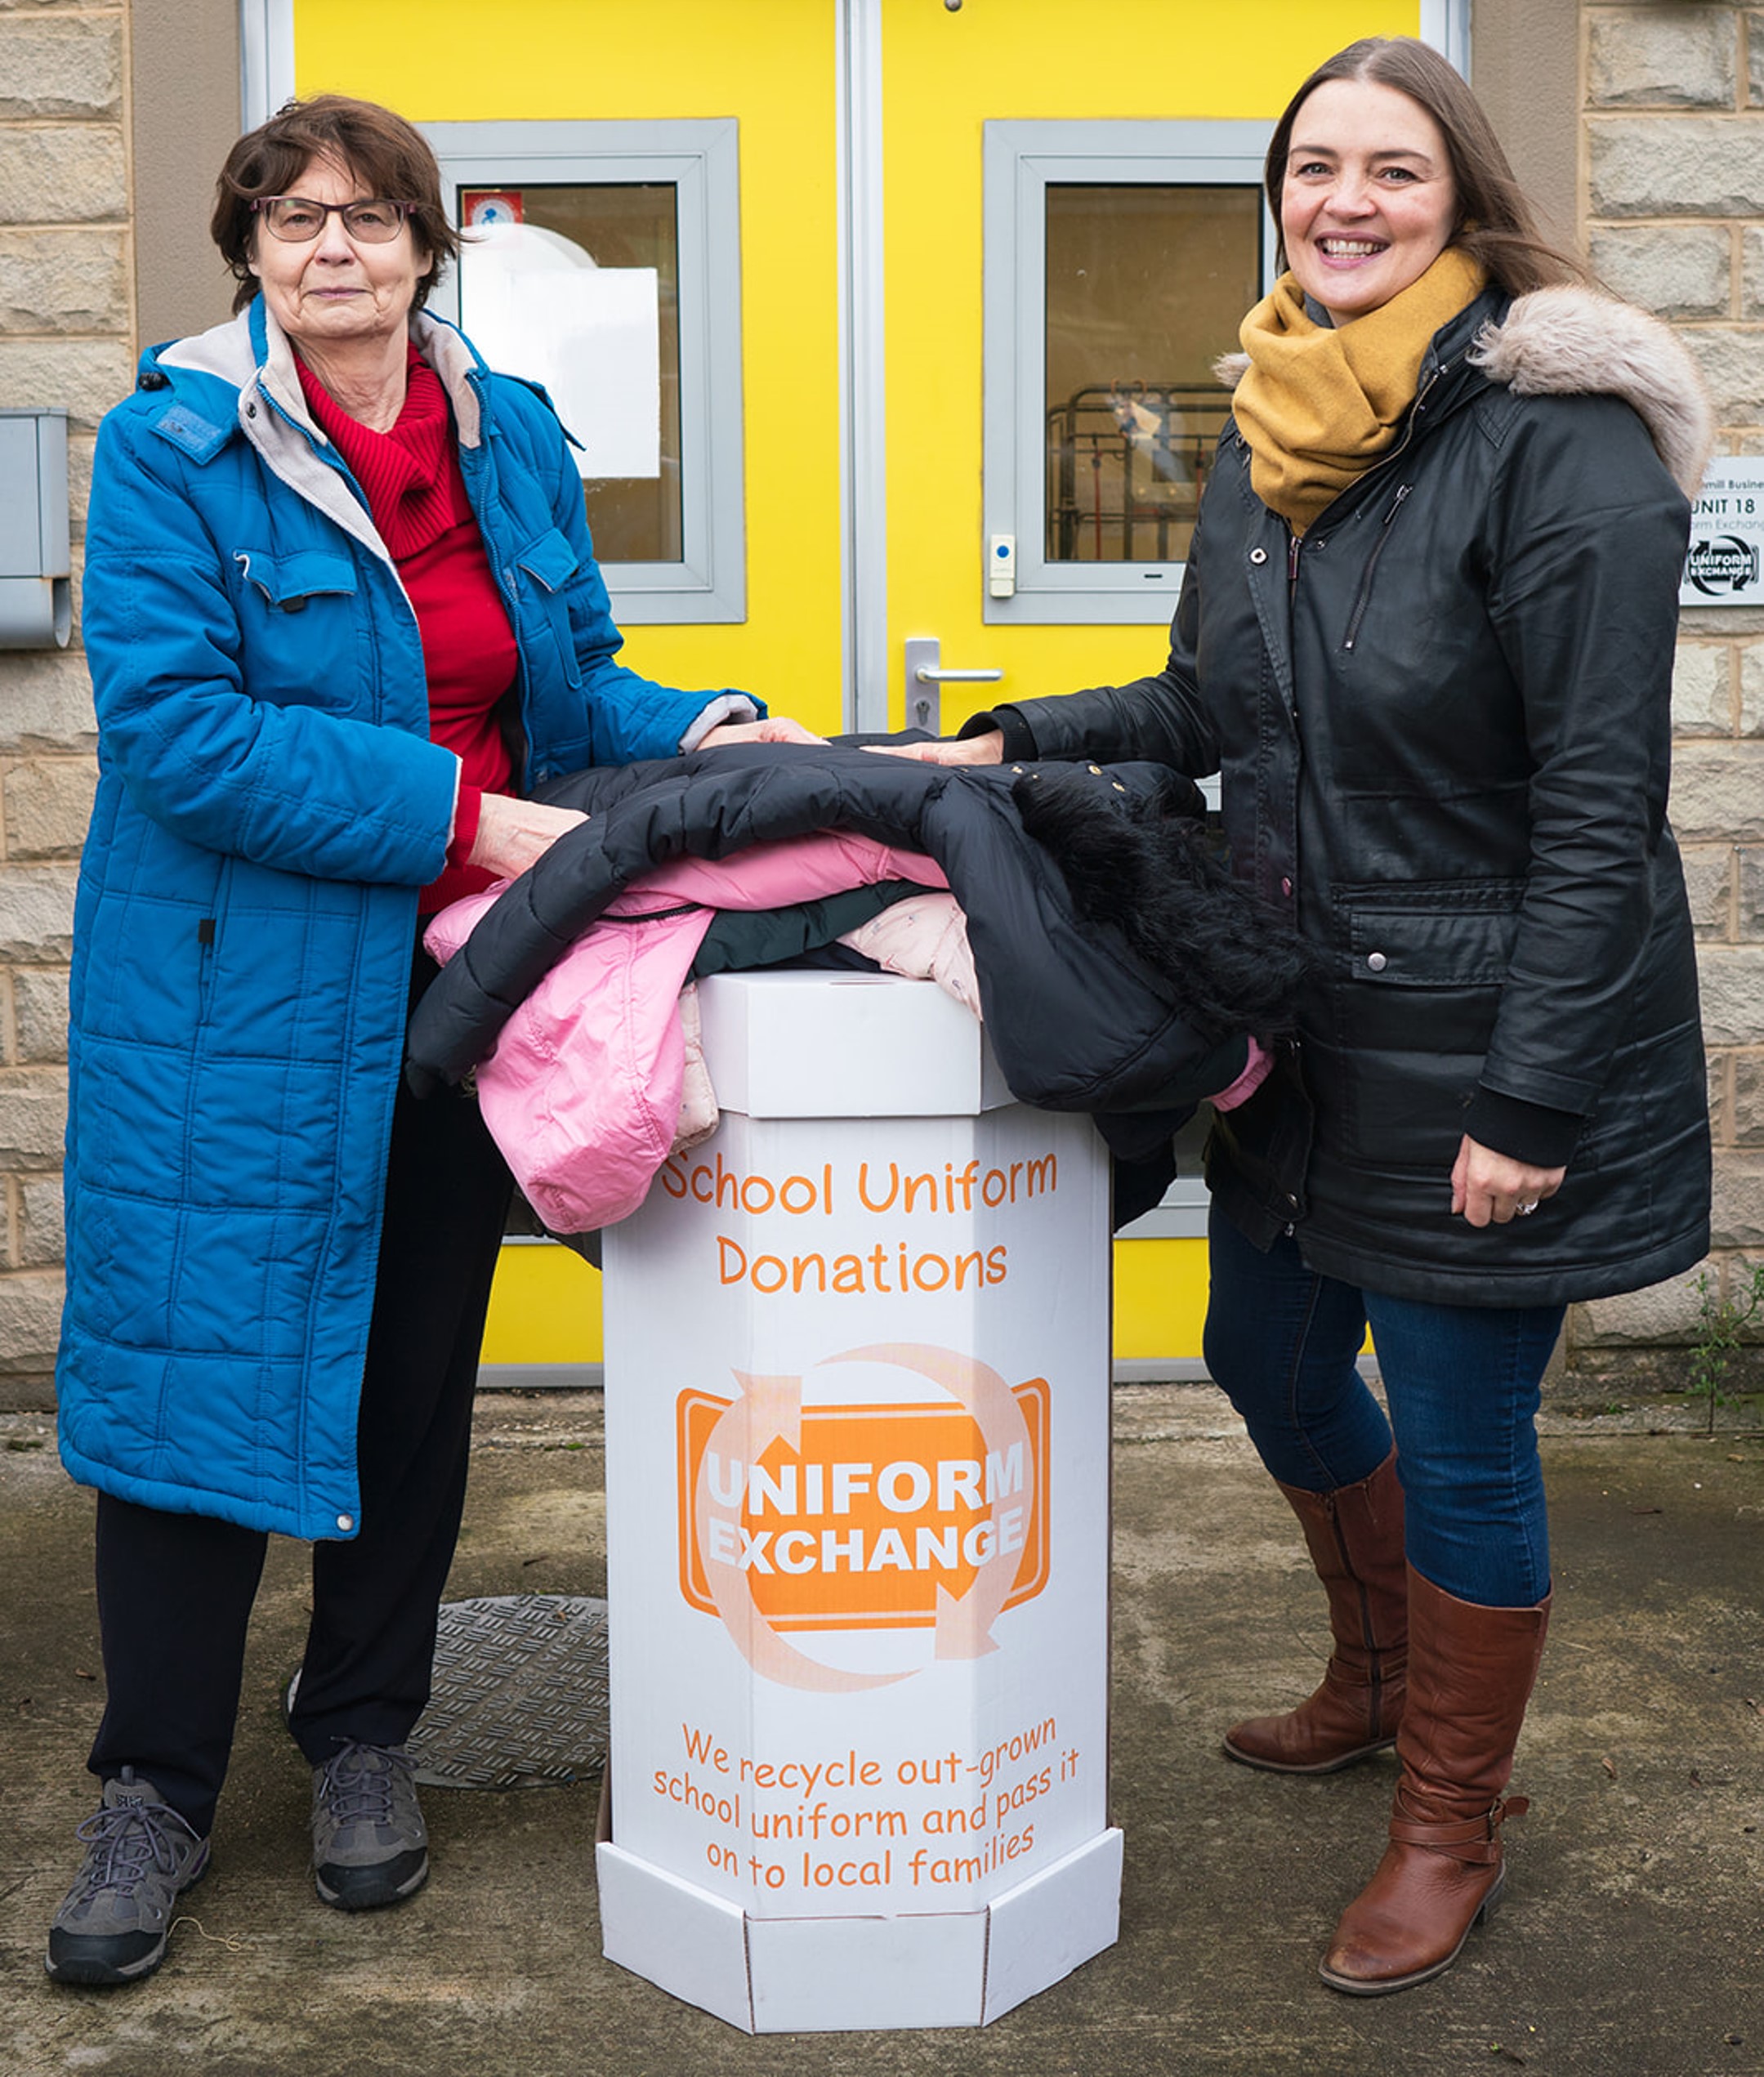 Kate France of Uniform Exchange with a school uniform donation bin and another woman.